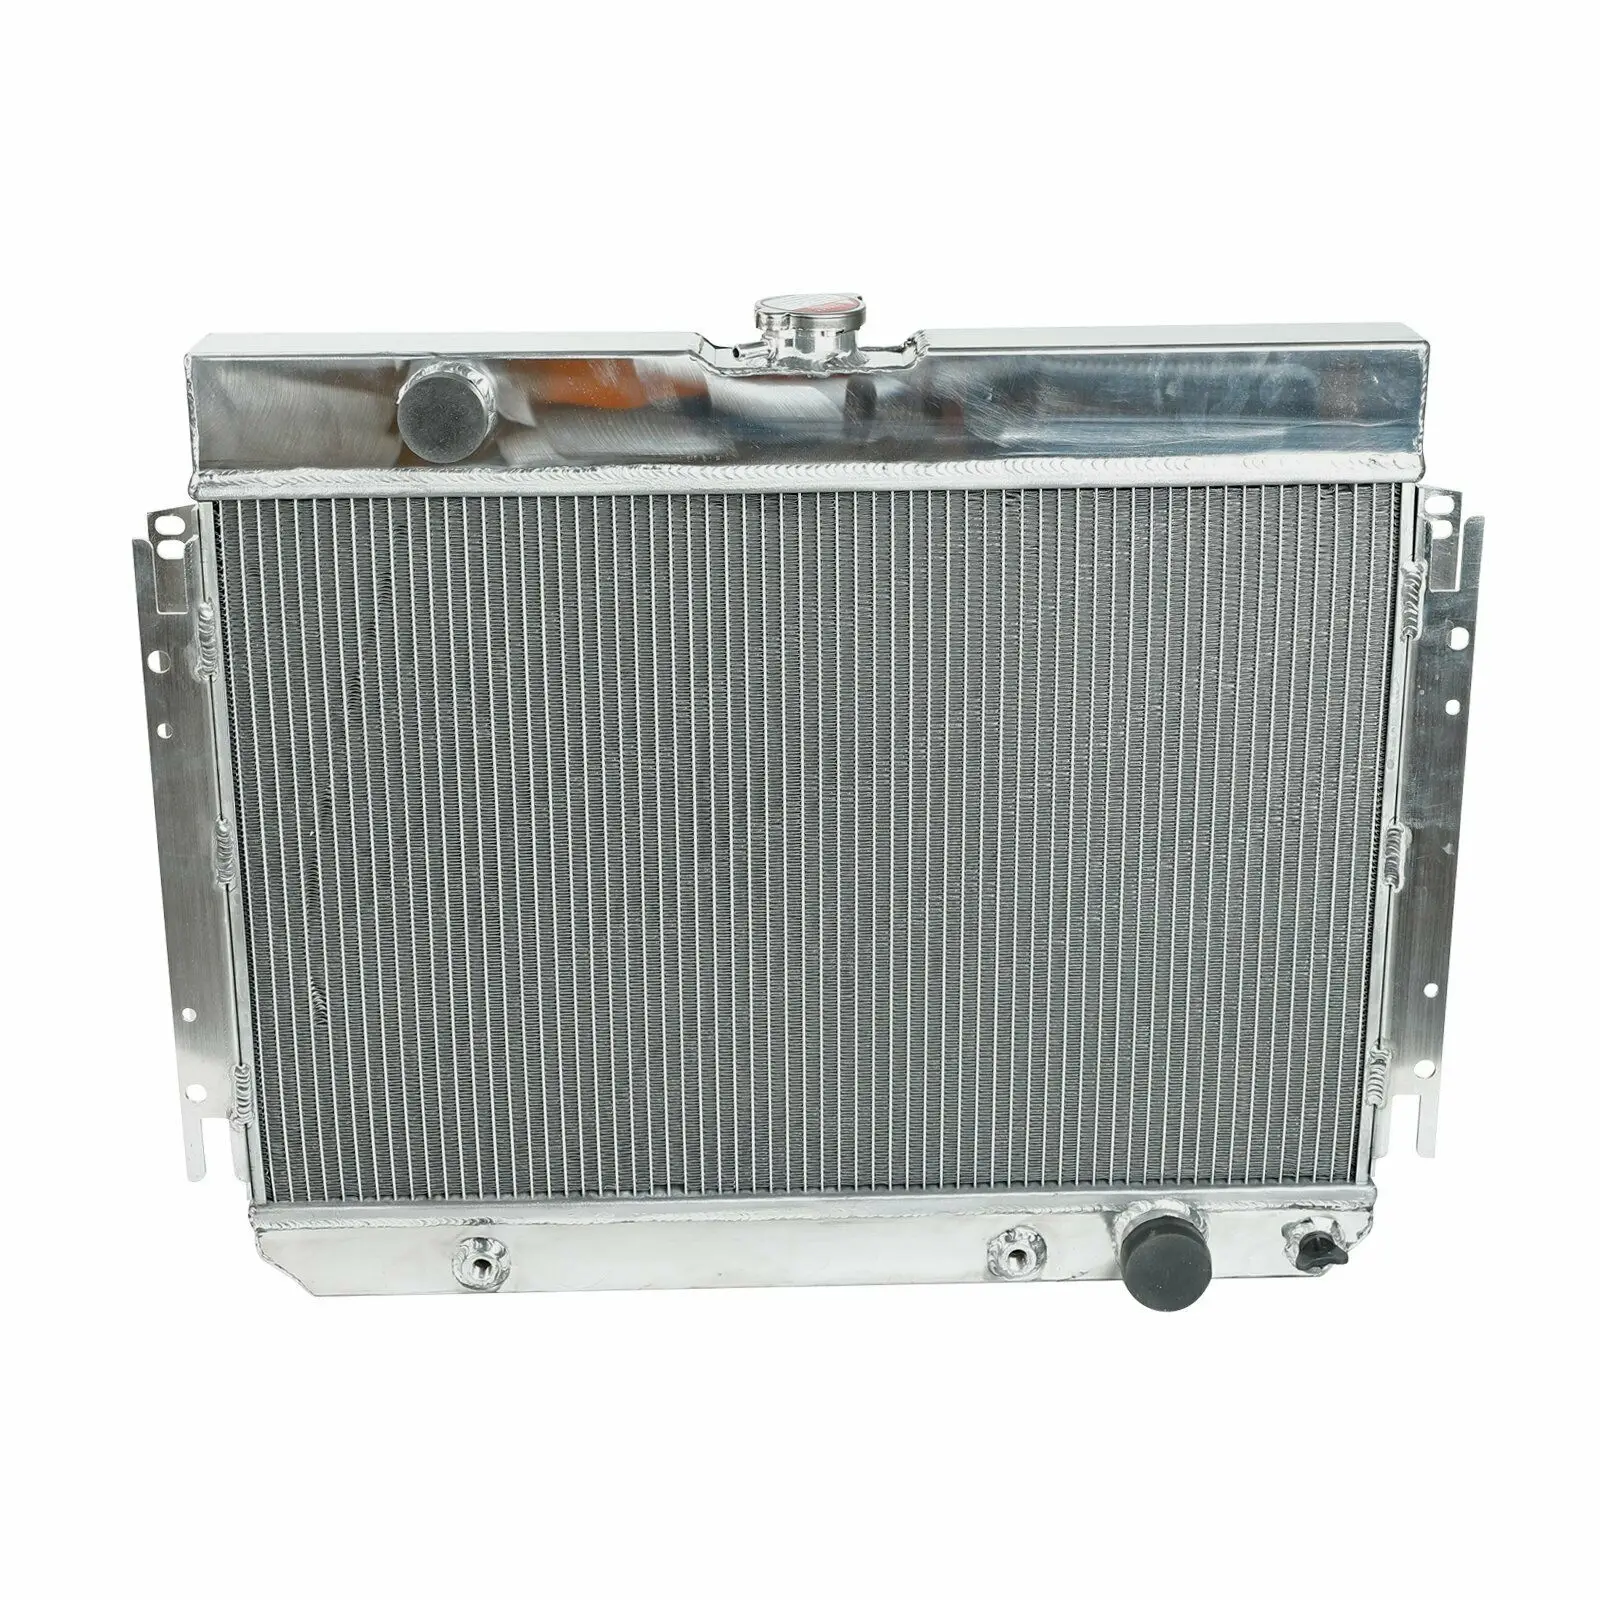 

3 Row Aluminum Radiator for Chevy 1963-1968 Bel Air & Biscayne & Impala & 1967-1968 Caprice & 1964-1965 Chevelle